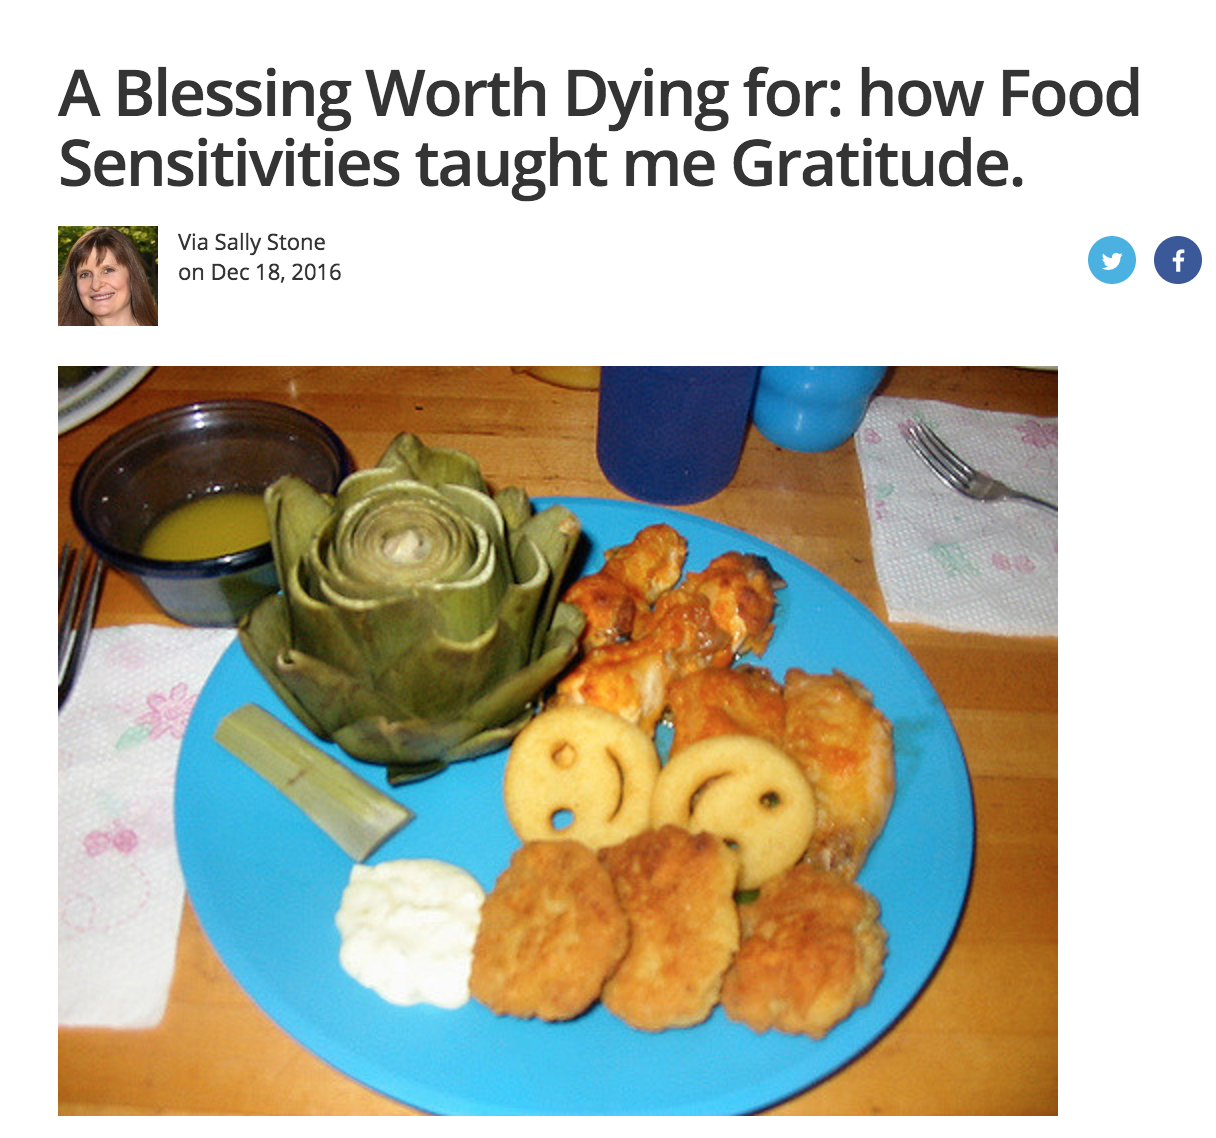 A Blessing Worth Dying For: how Food Sensitivities taught me Gratitude 